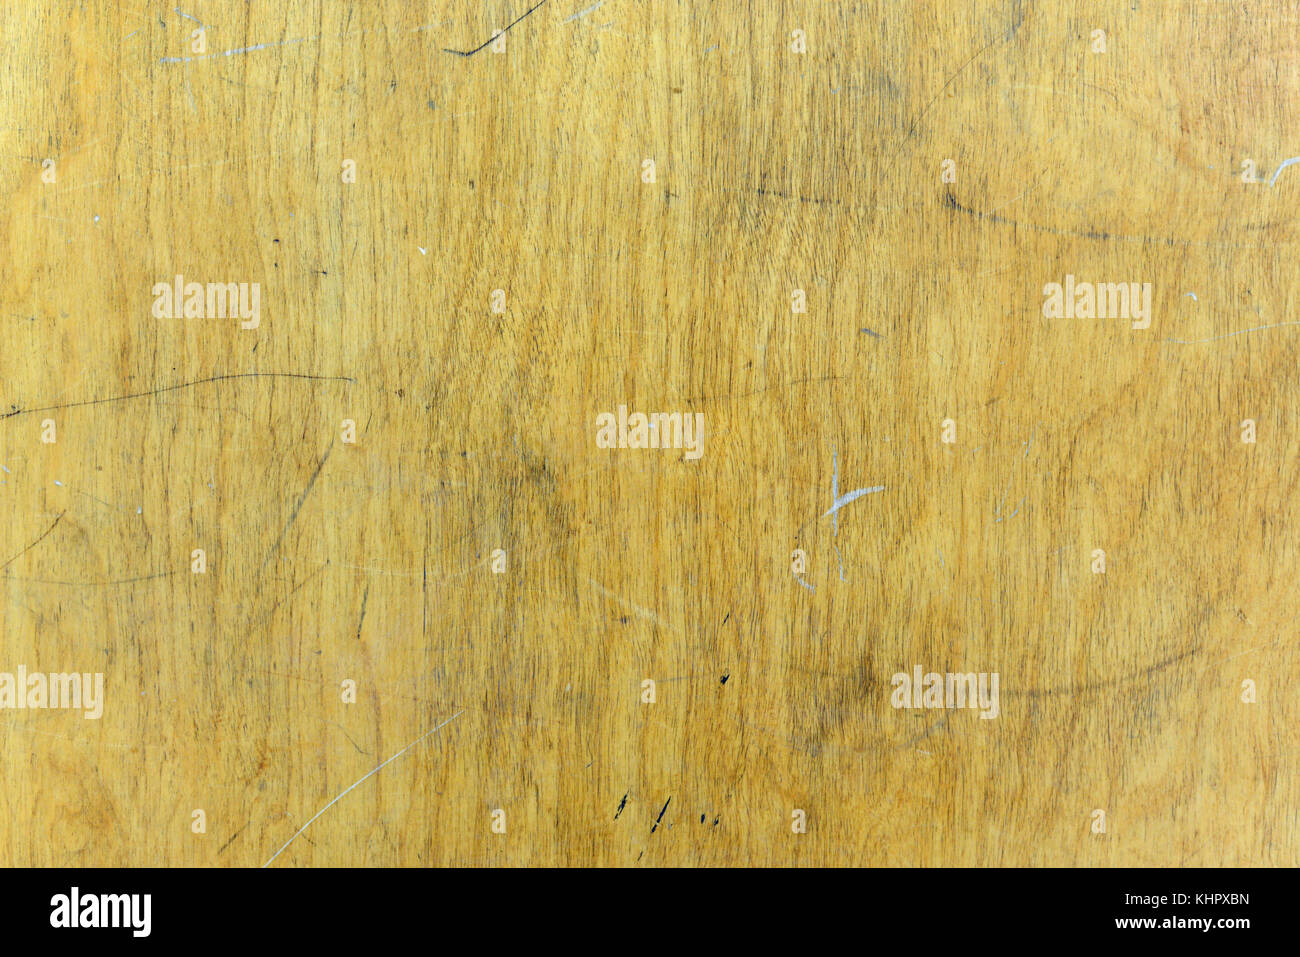 Light Colored Wood Wall Marked Up, dirty, old Stock Photo